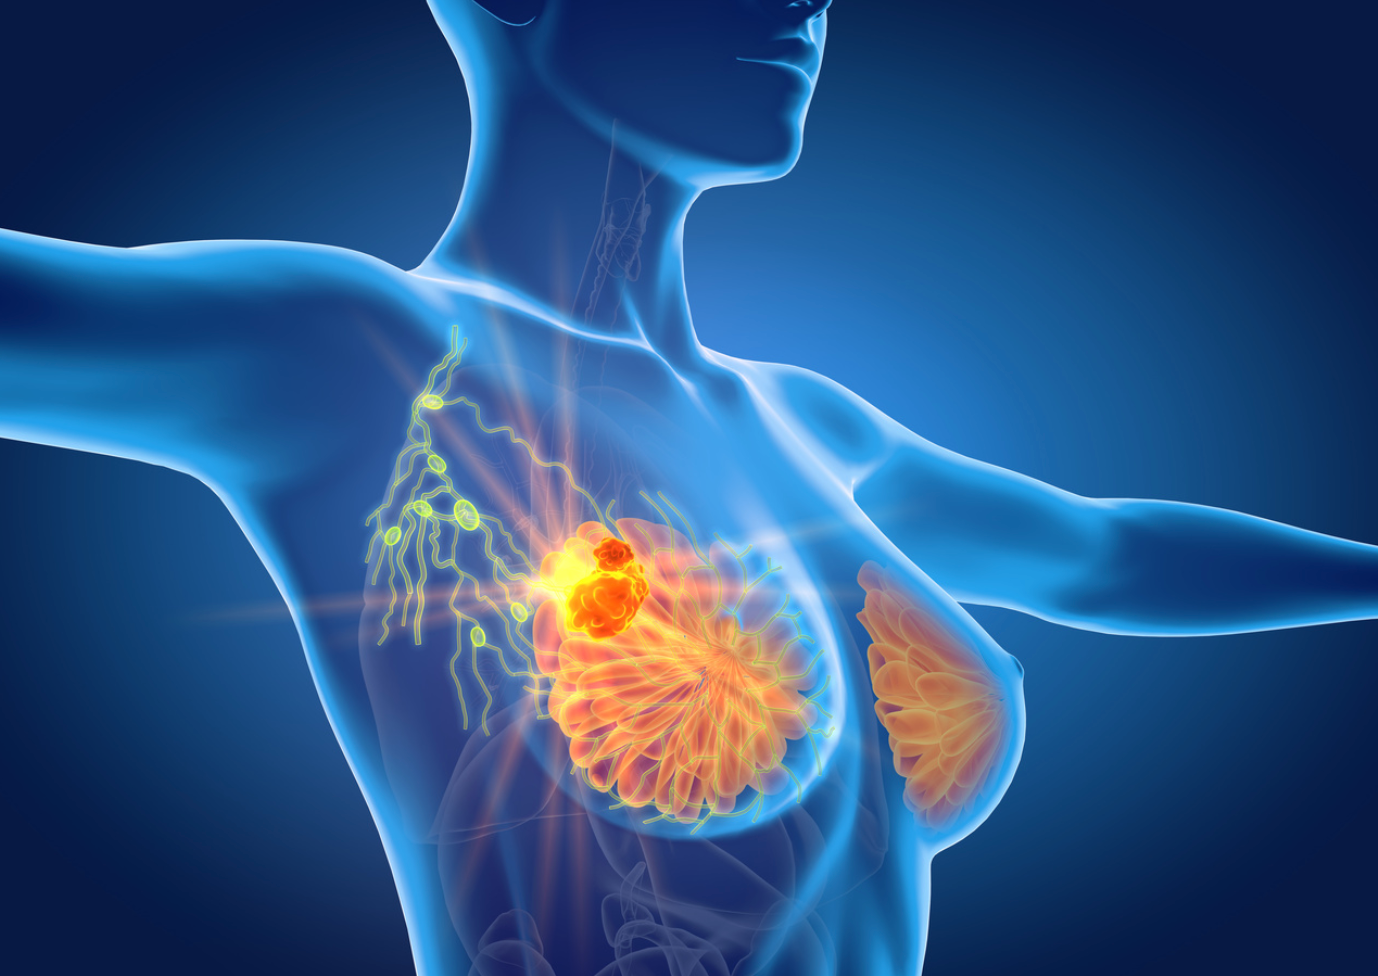 Pyrotinib, Capecitabine Combination Therapy Improves Clinical Outcomes for Certain Patients with HER2-Positive Breast Cancer